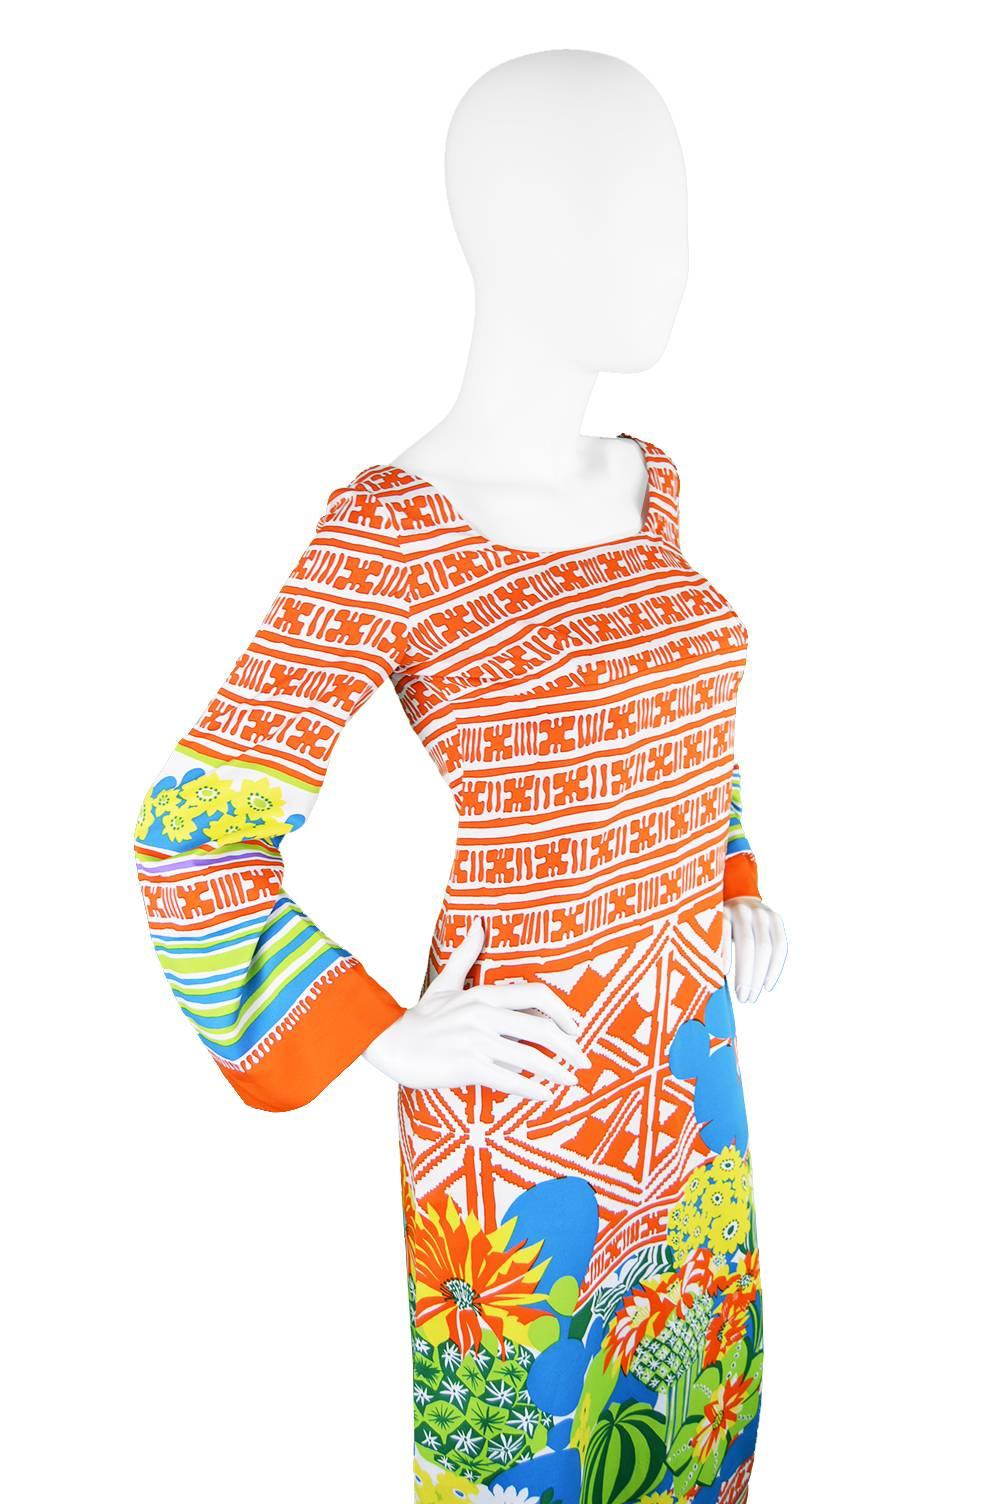 Lanvin Boutique Orange Tropical Cactus Printed Maxi Dress, S/S 1973 In Excellent Condition For Sale In Doncaster, South Yorkshire